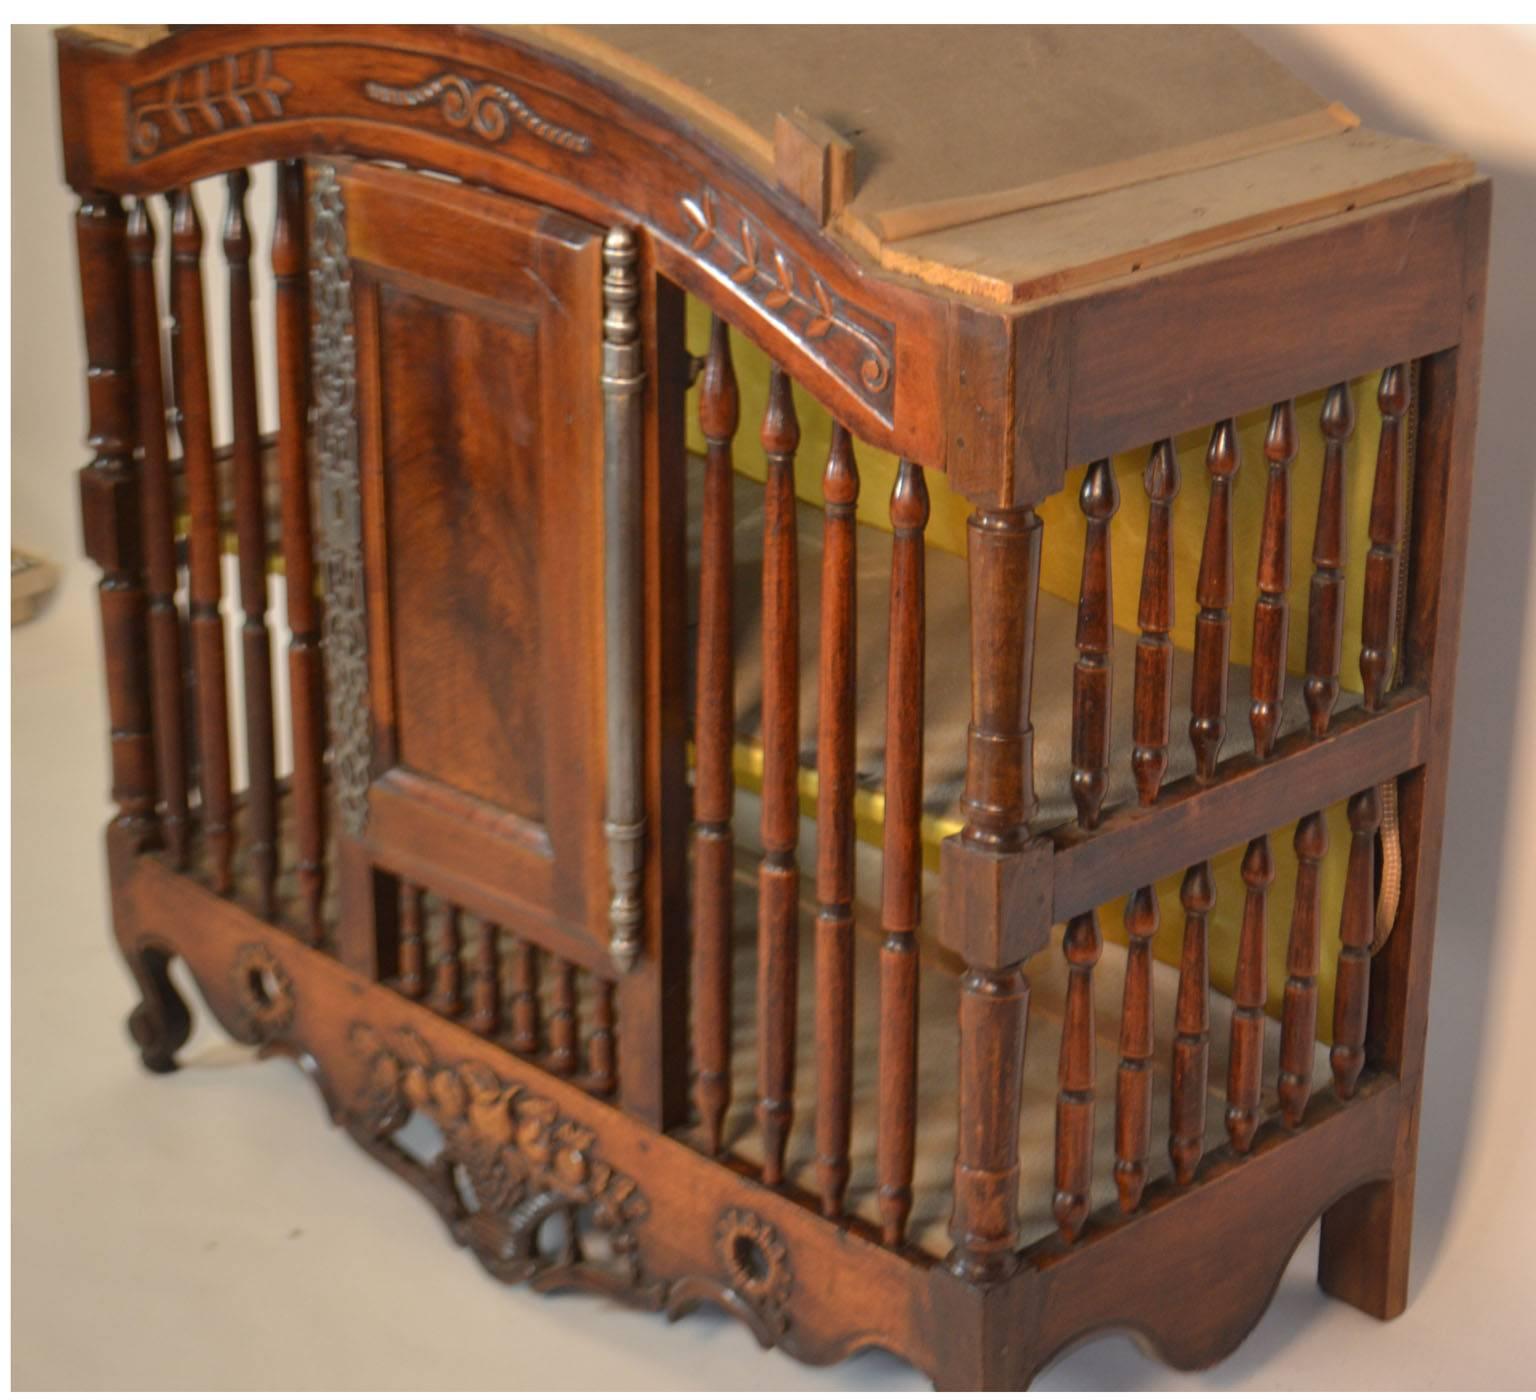 18th century Pannetiere in walnut from Provence, circa 1760. This piece is decorated with rare long key plates and hinges and spindle bars. On the apron rests a basket of fruit flanked by open sunflowers.